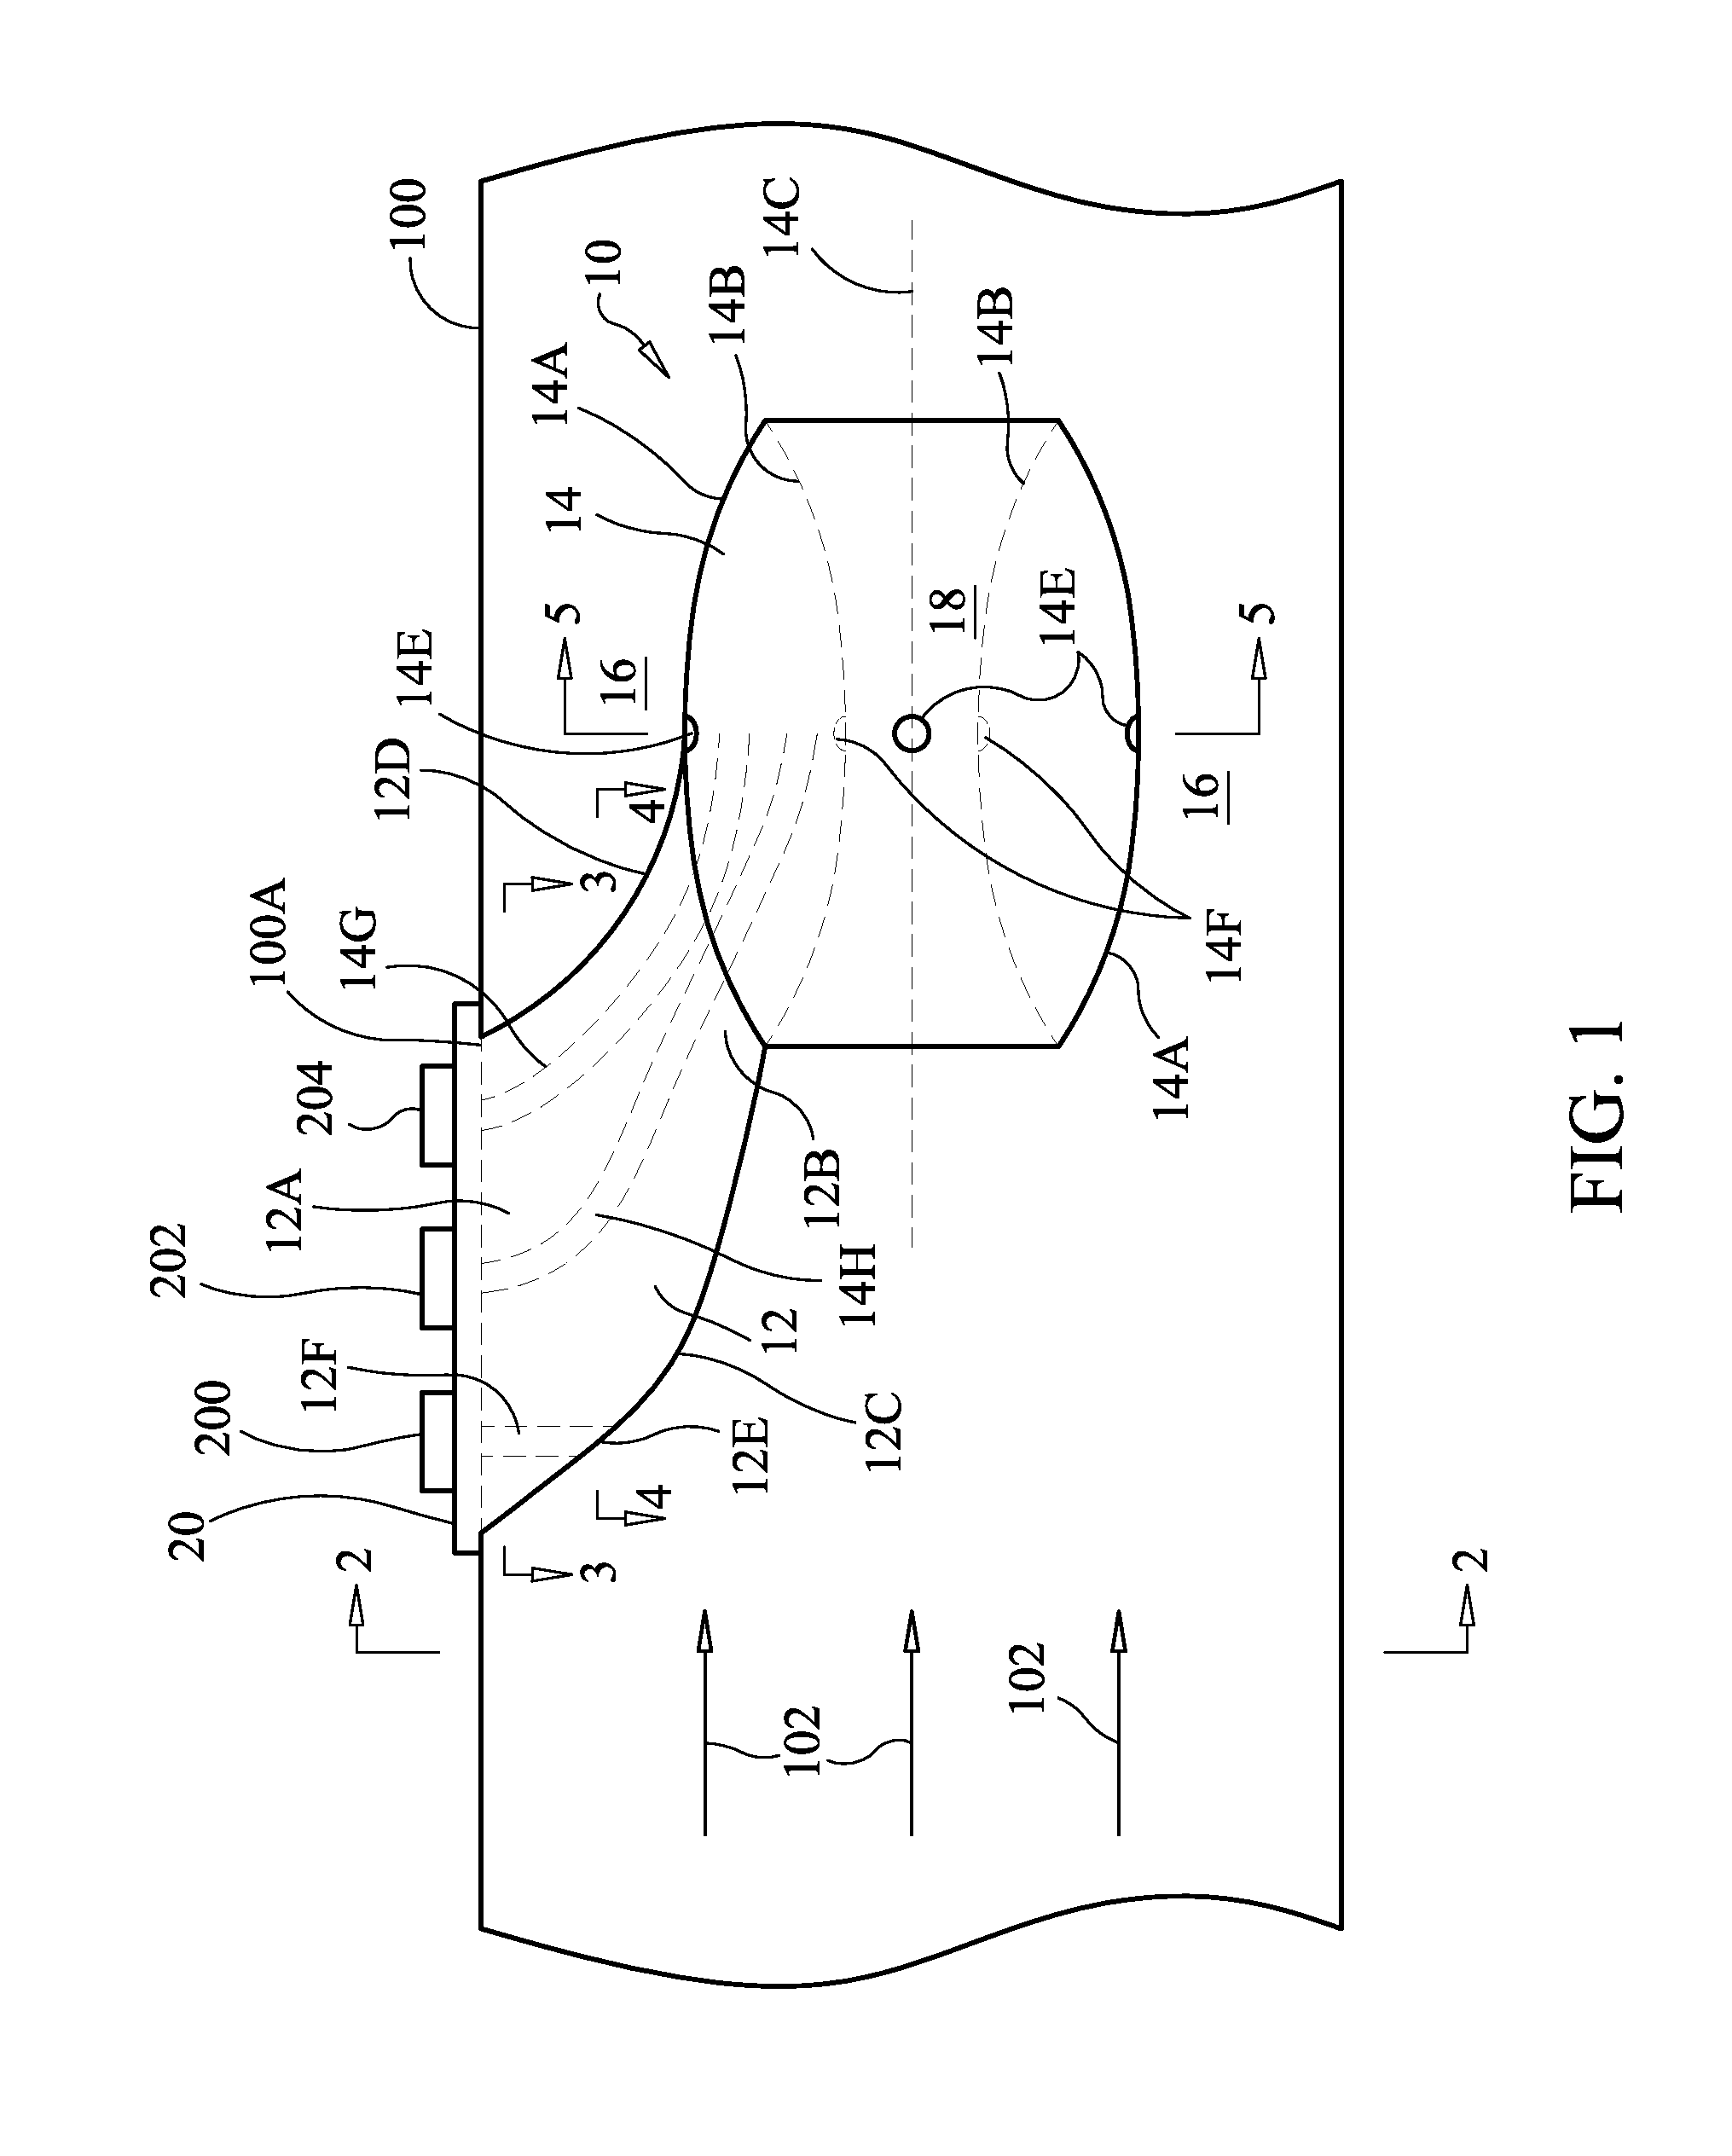 Self-contained tubular compressed-flow generation device for use in making differential measurements